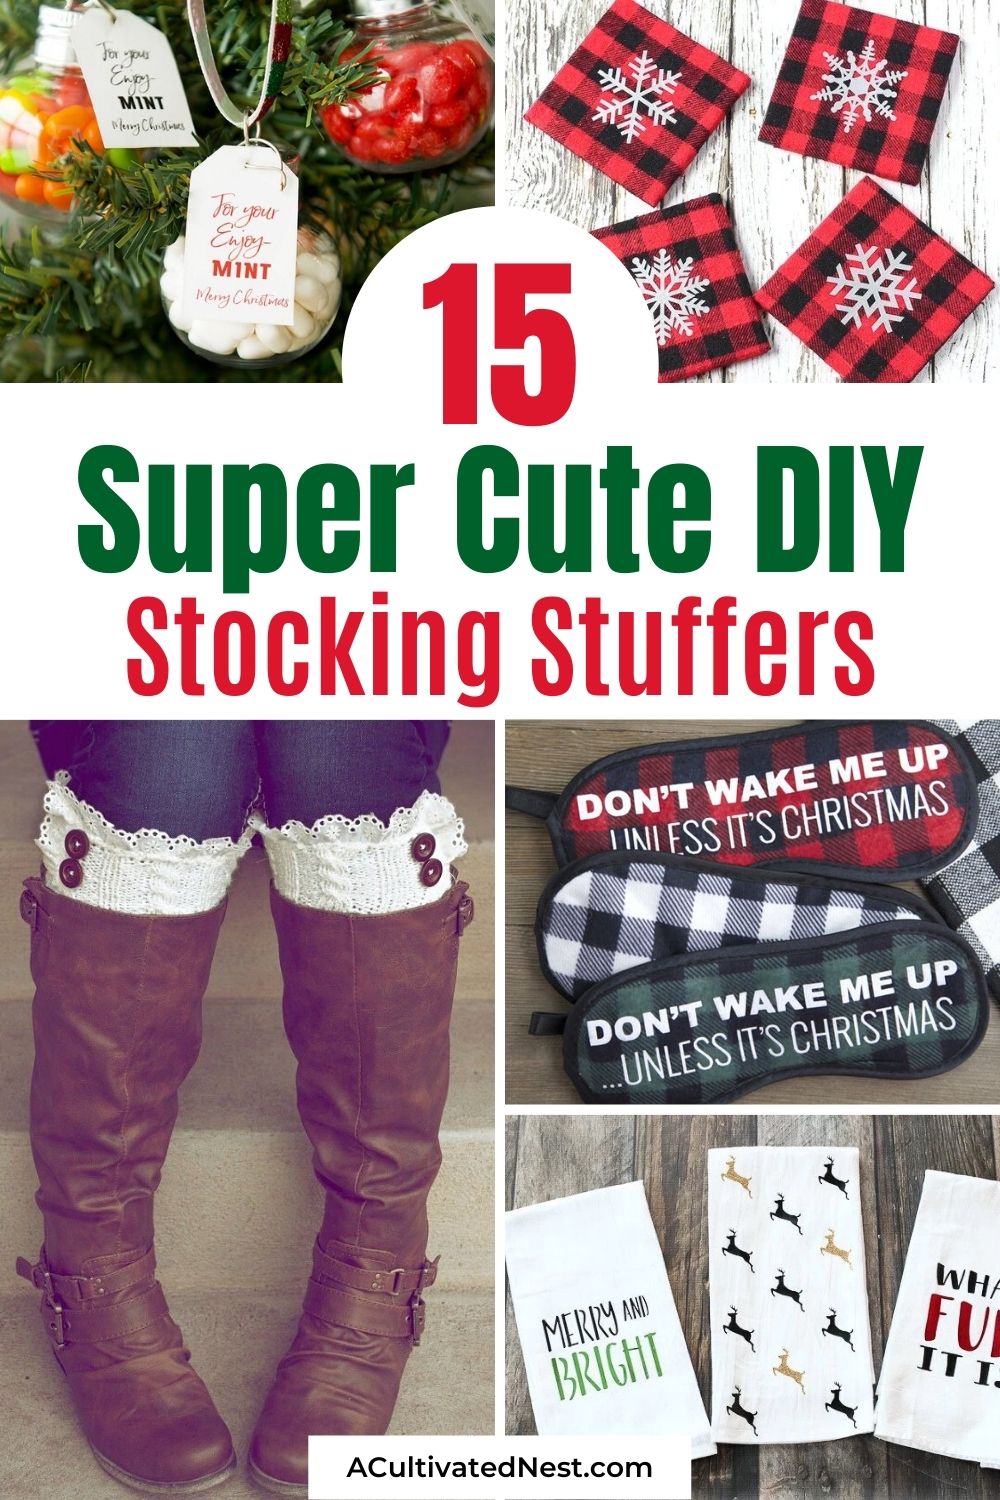 15 Super Cute DIY Stocking Stuffers- If you're making homemade Christmas gifts this year, don't forget the stocking stuffers! Here are 15 really cute homemade stocking stuffer ideas for you to try! | #stockingStuffer #diyChristmasGifts #homemadeChristmasGifts #homemadeStockingStuffers #ACultivatedNest